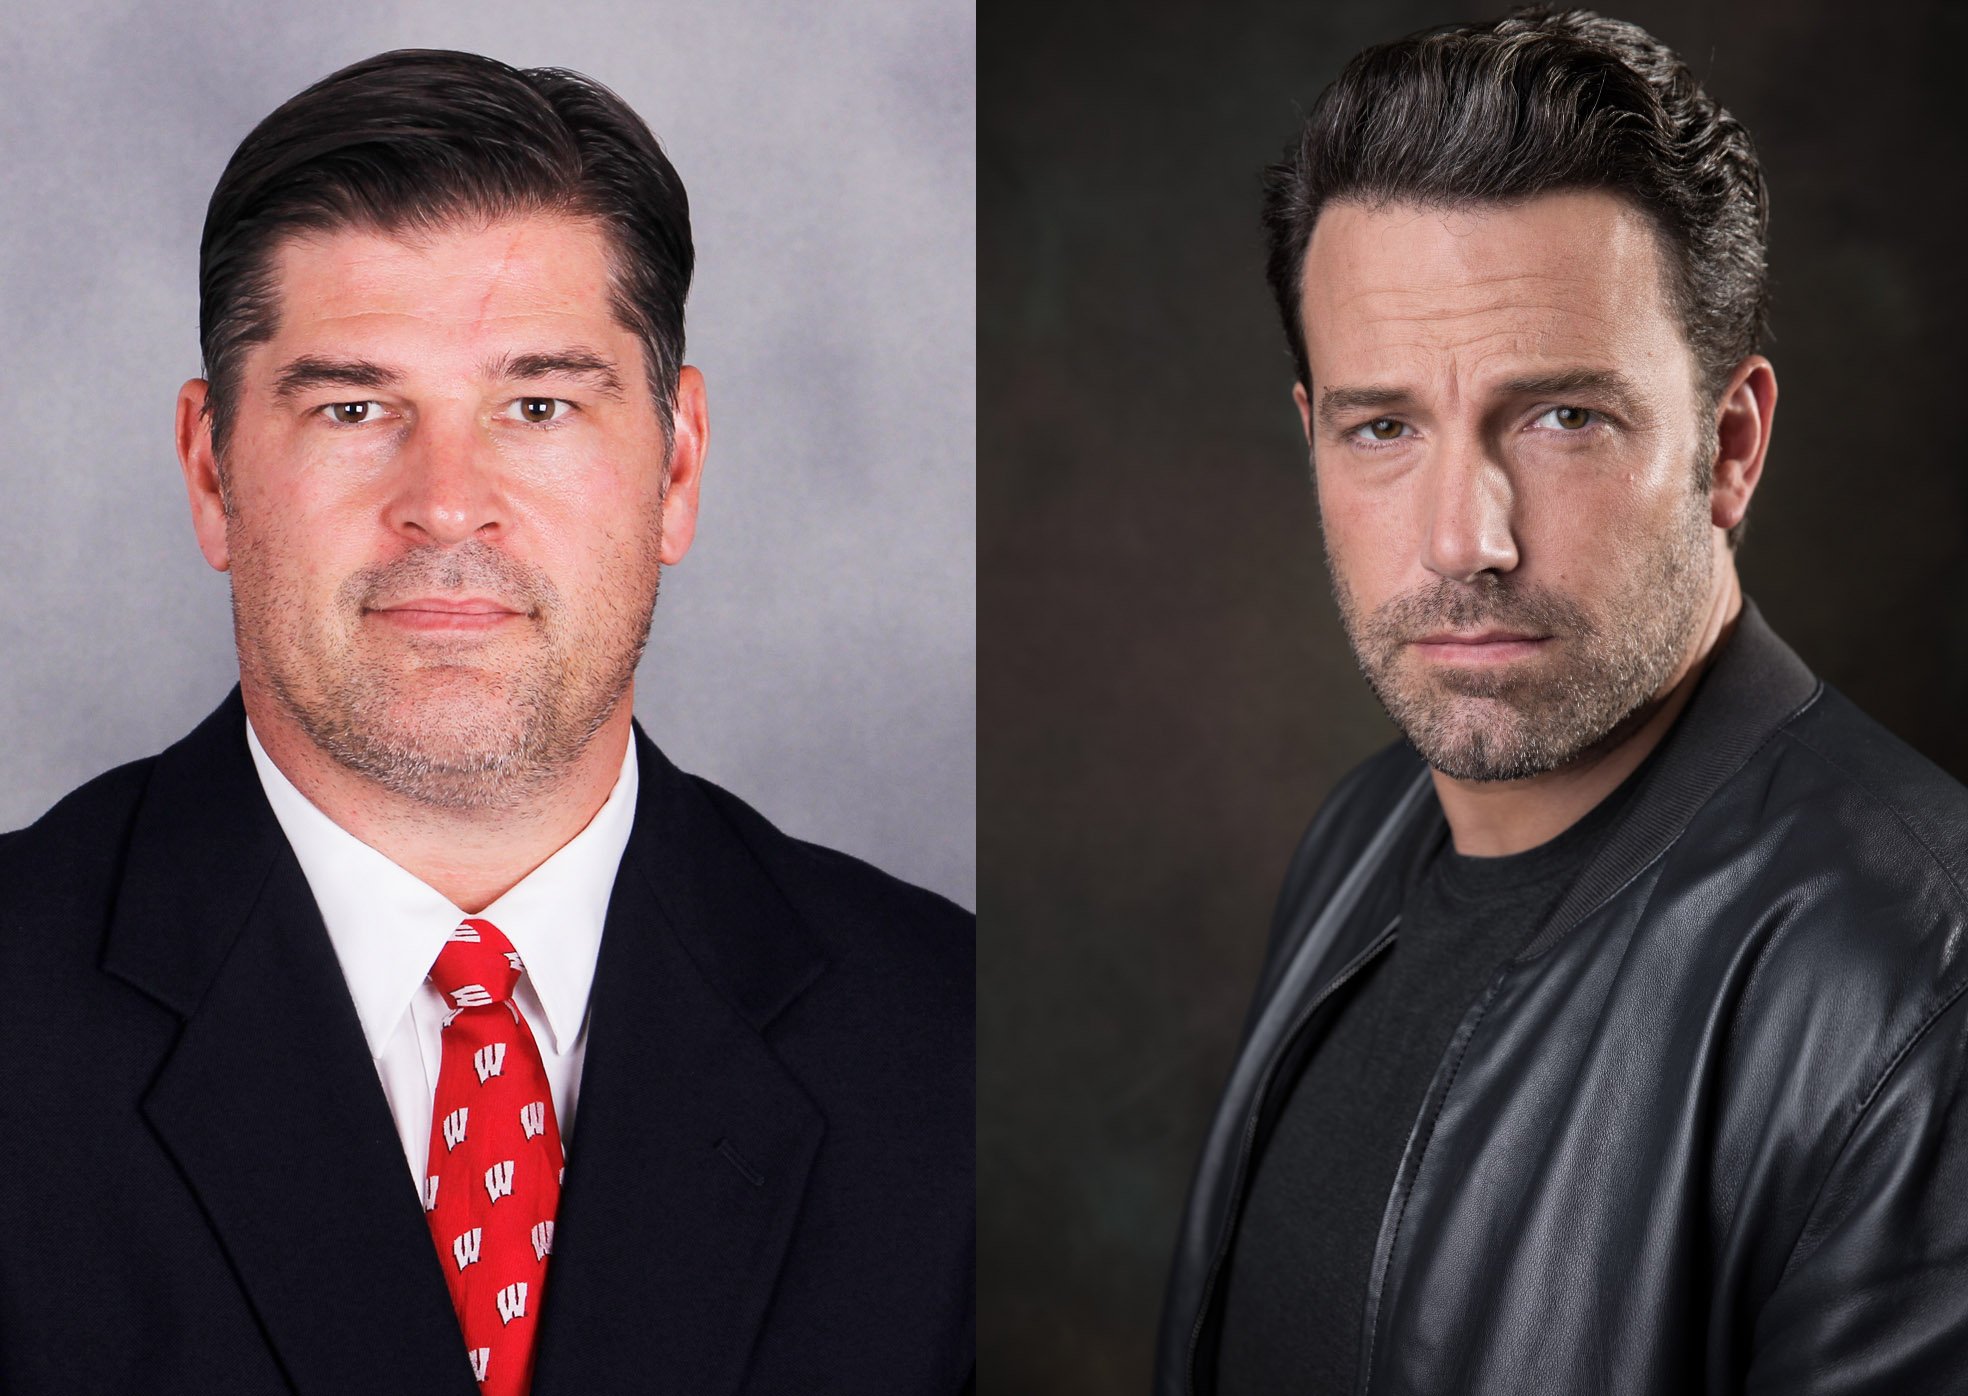 Who wore the five \o-clock shadow better, Mark Strobel or Ben Affleck? Either way, happy birthday to both! 